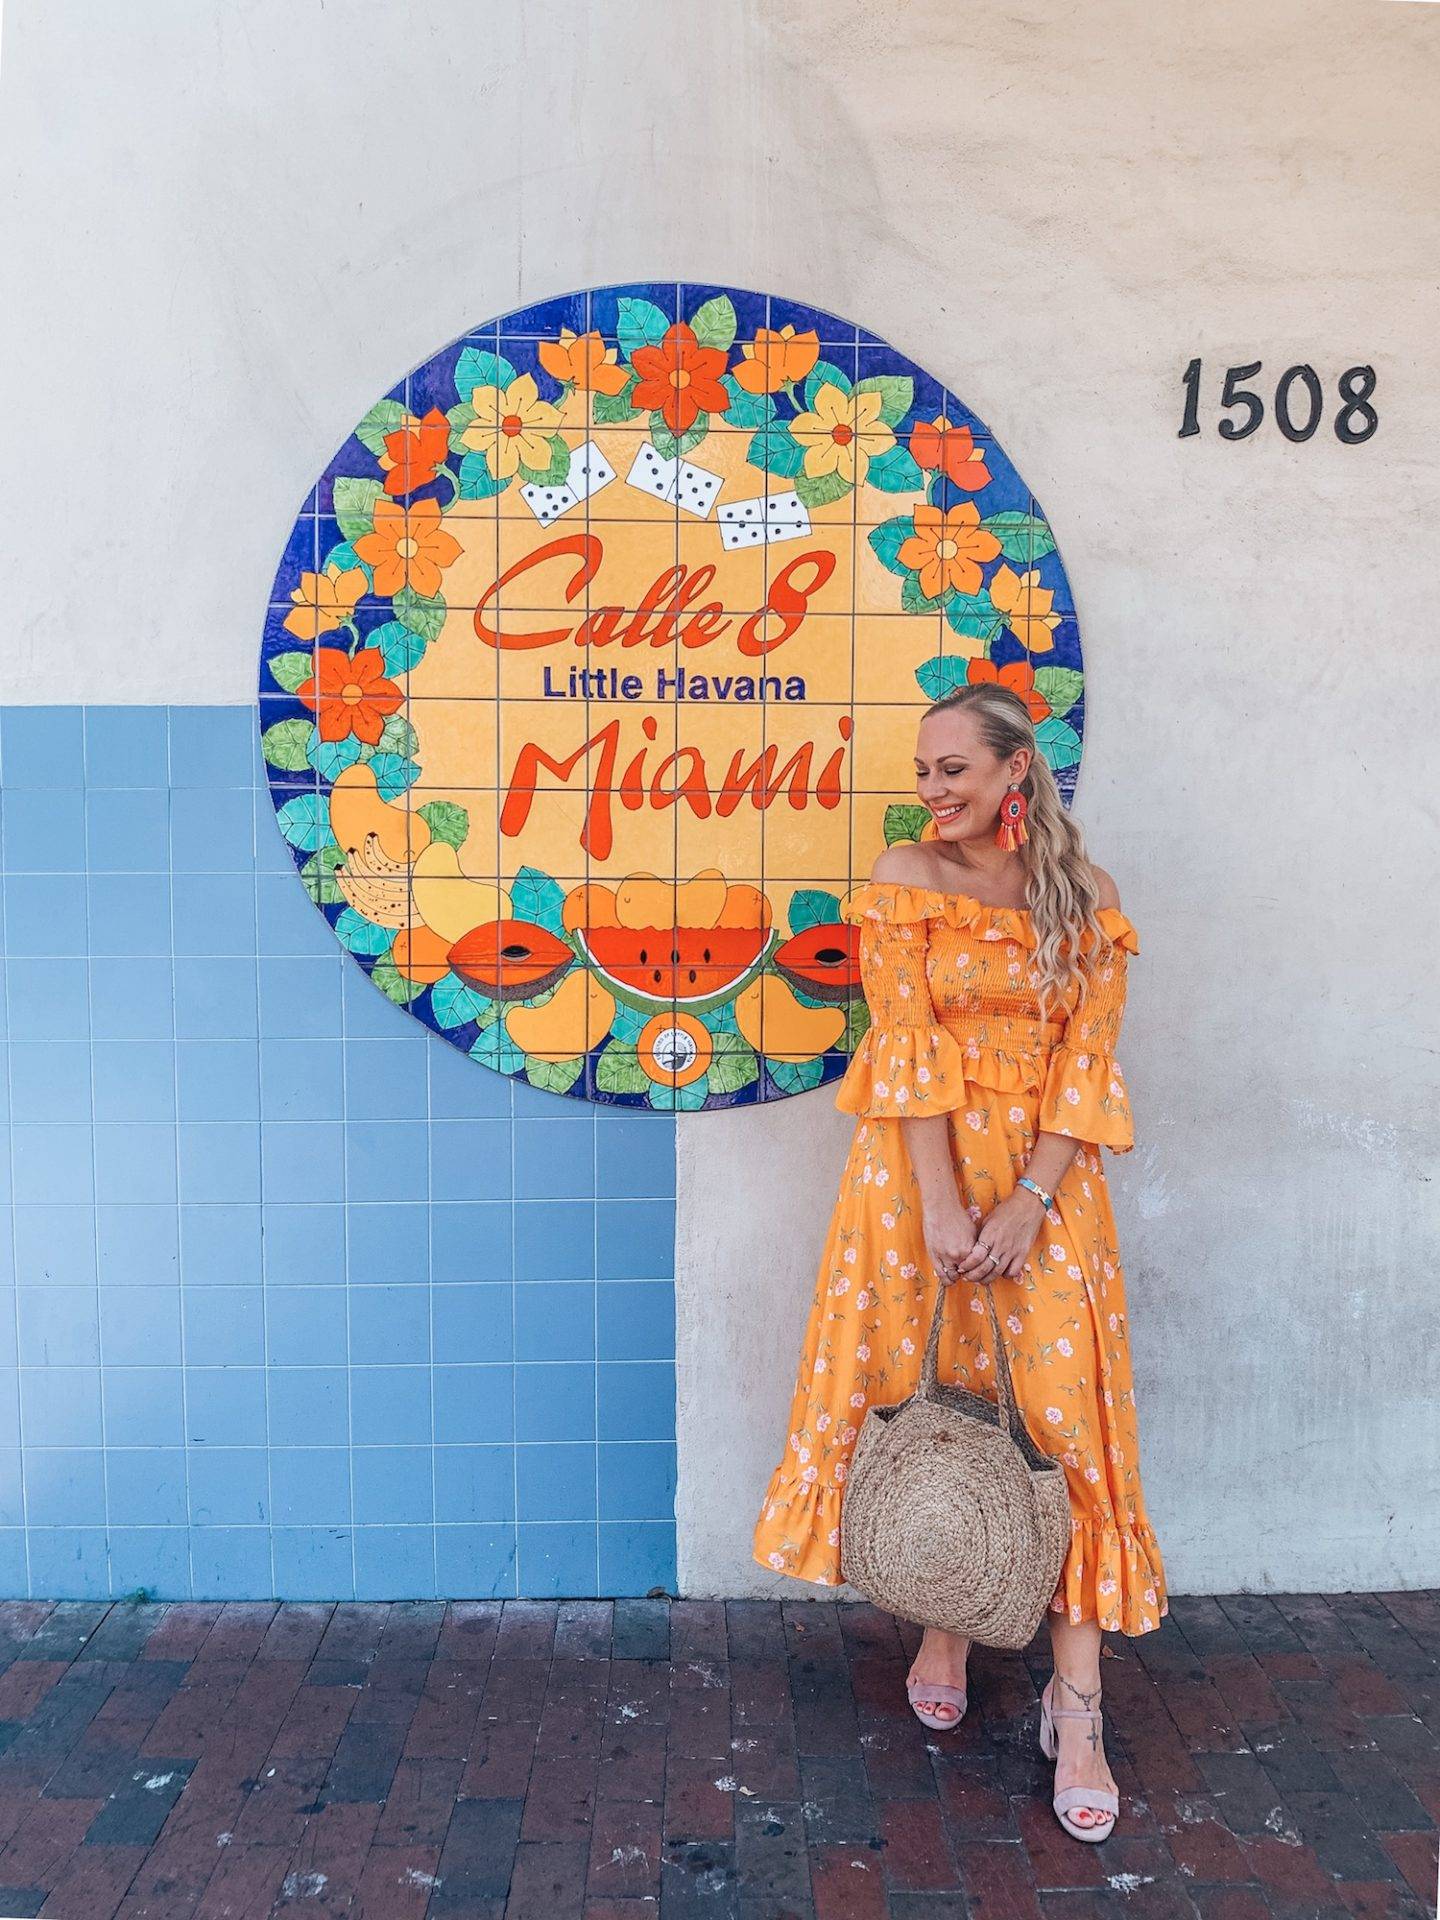 How to spend 1 perfect day in Little Havana, Miami. A complete guide on what to see and do, which restaurants to dine at, bars to visit, Cuban treats to try and more. If you're headed to Little Havana for the day you'll definitely want to read this guide! Pictured here: You must visit the famous Calle Ocho in Little Havana Miami.